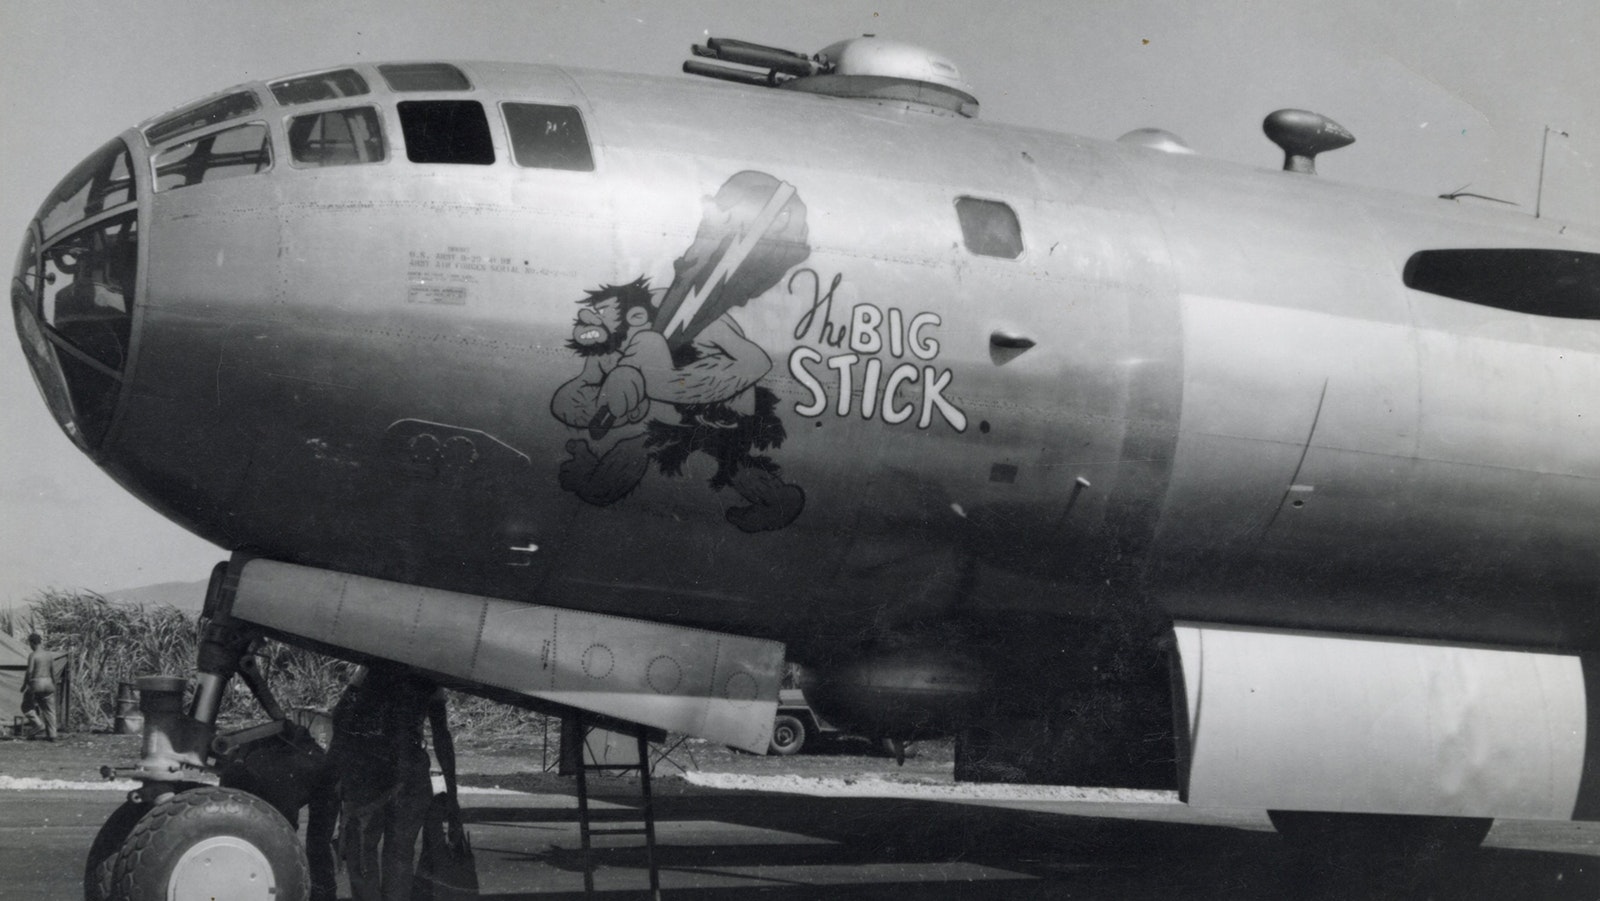 The B-29 bomber flown on bombing raids over Japan was named “Big Stick” and carried original art drawn by Walt Disney himself.